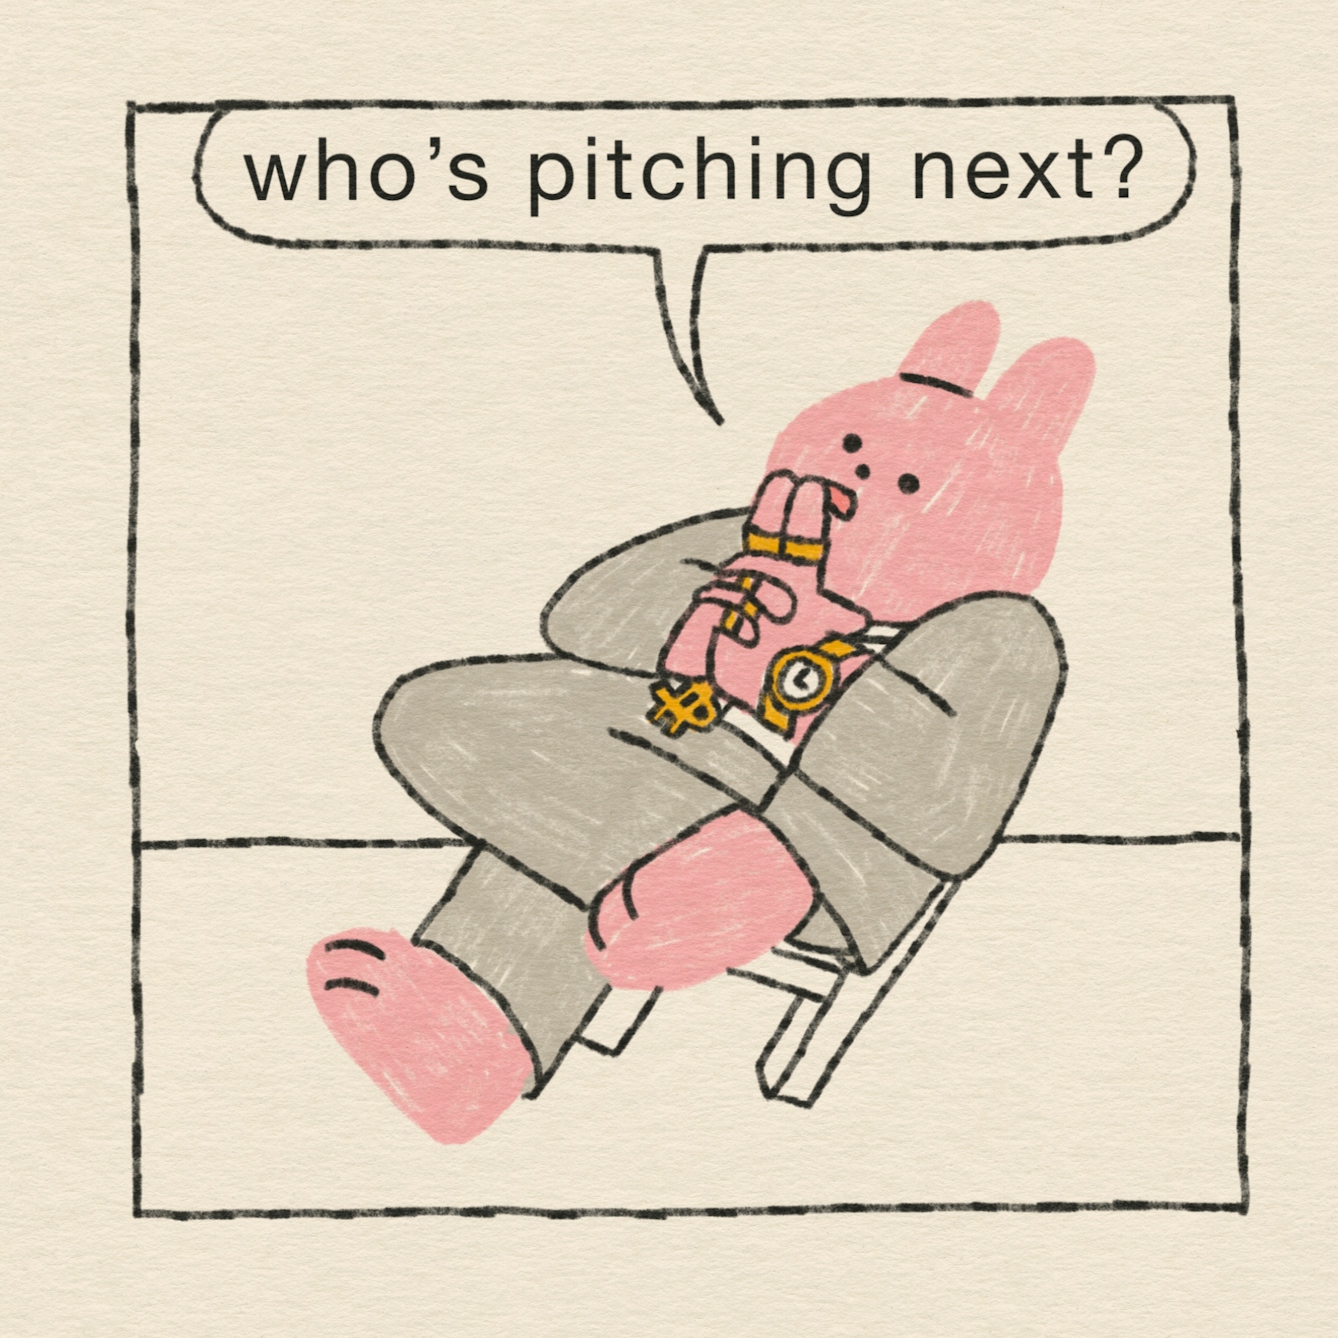 The company CEO, in his flashy grey suit and gold jewellery, leans back in his chair and rubs his hands together. “Who’s pitching next?”, he says. 